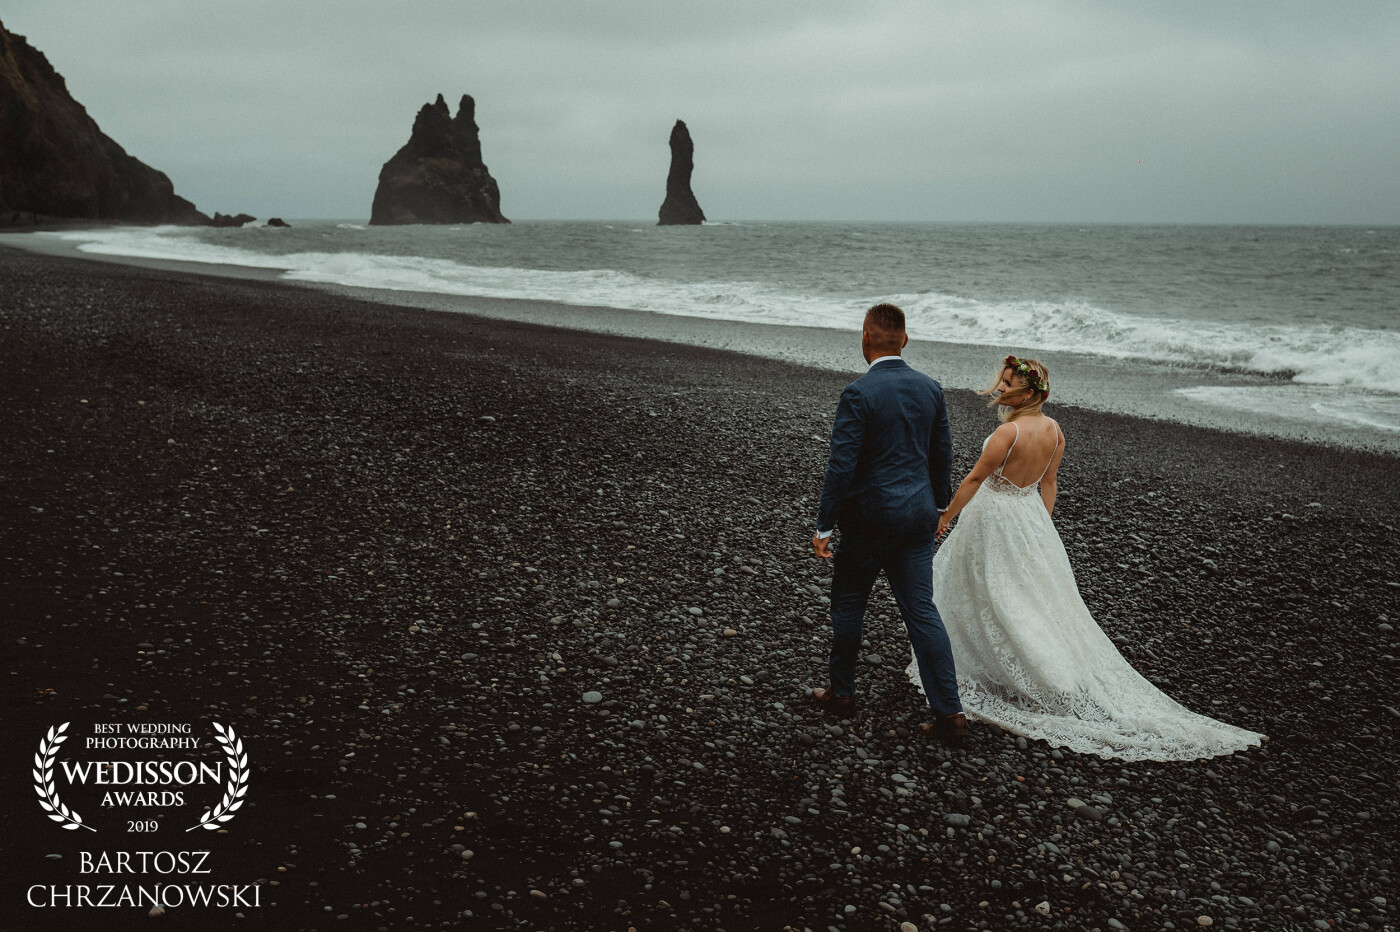 Agnieszka and Karol's dream was a session in Iceland. I was very happy about this fact because it is a beautiful country with a fantastic landscape. The weather changed from minute to minute and, fortunately, we had a good weather window to take this photo.<br />
